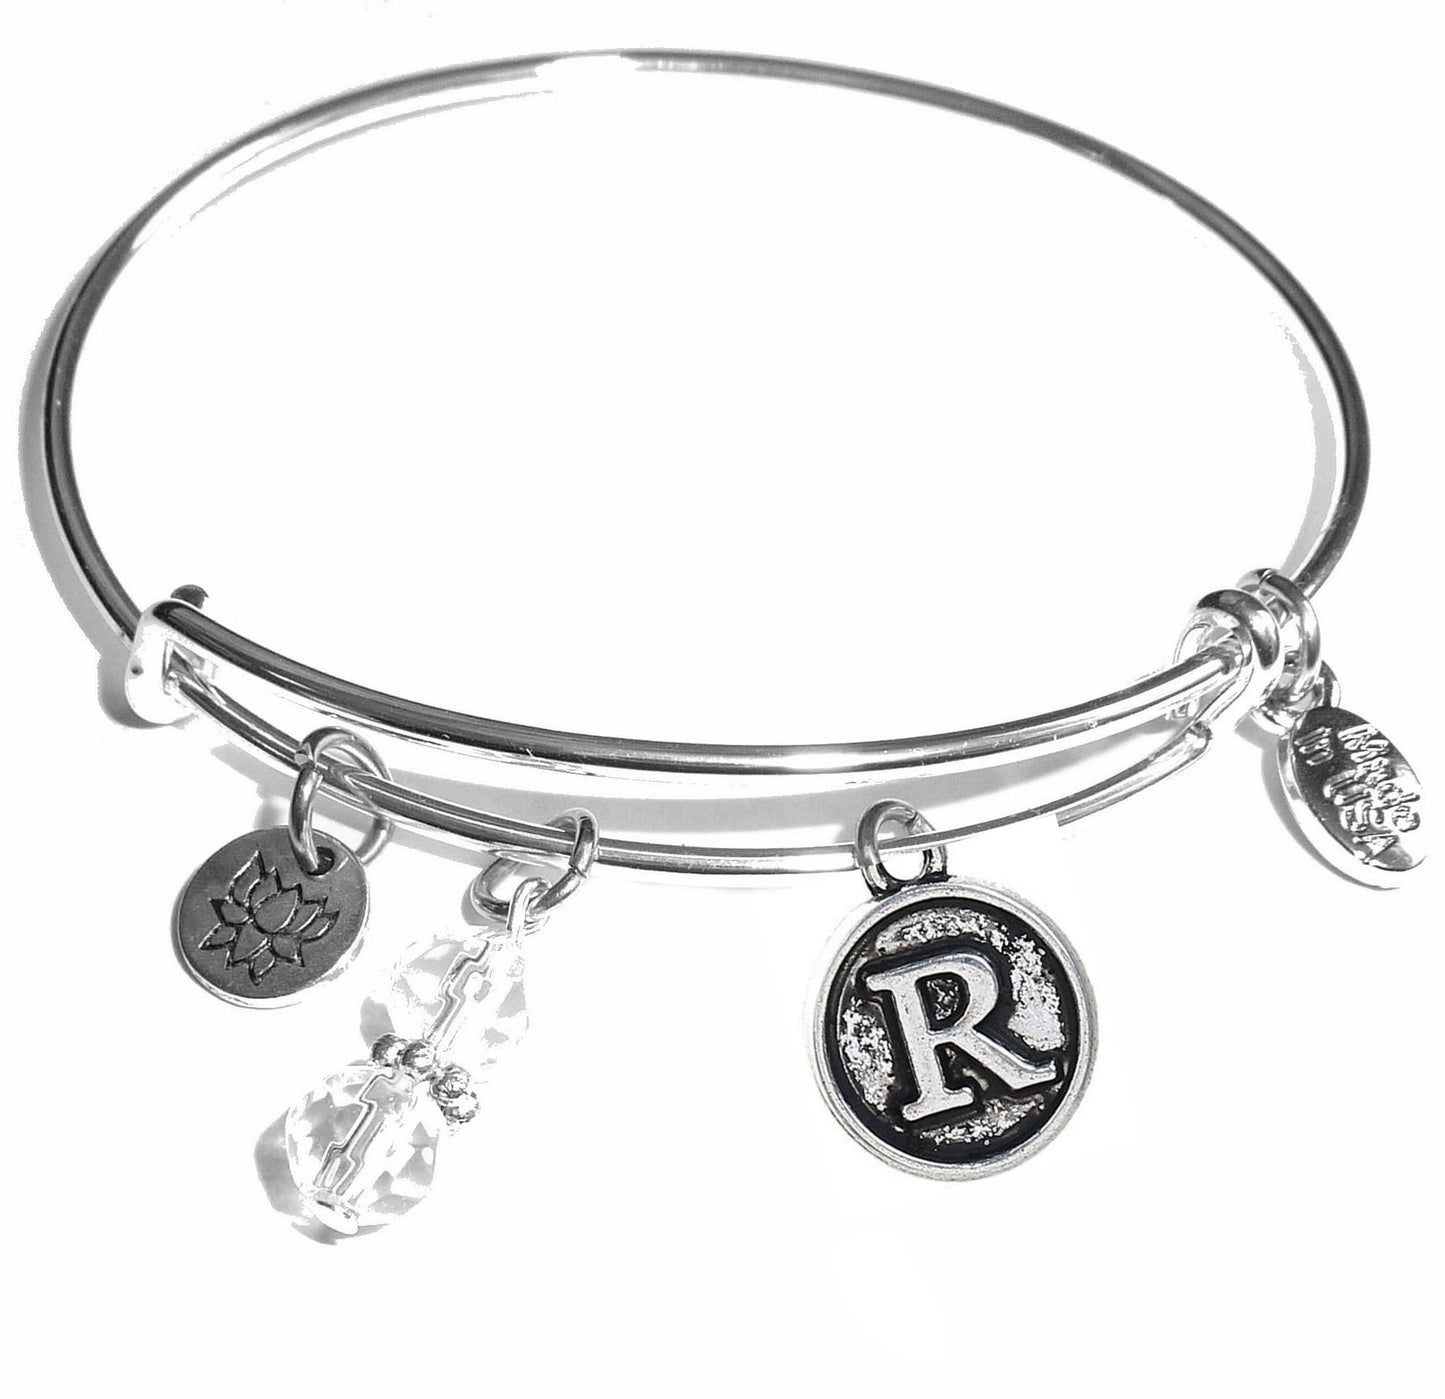 R - Initial Bangle Bracelet -Expandable Wire Bracelet– Comes in a gift box